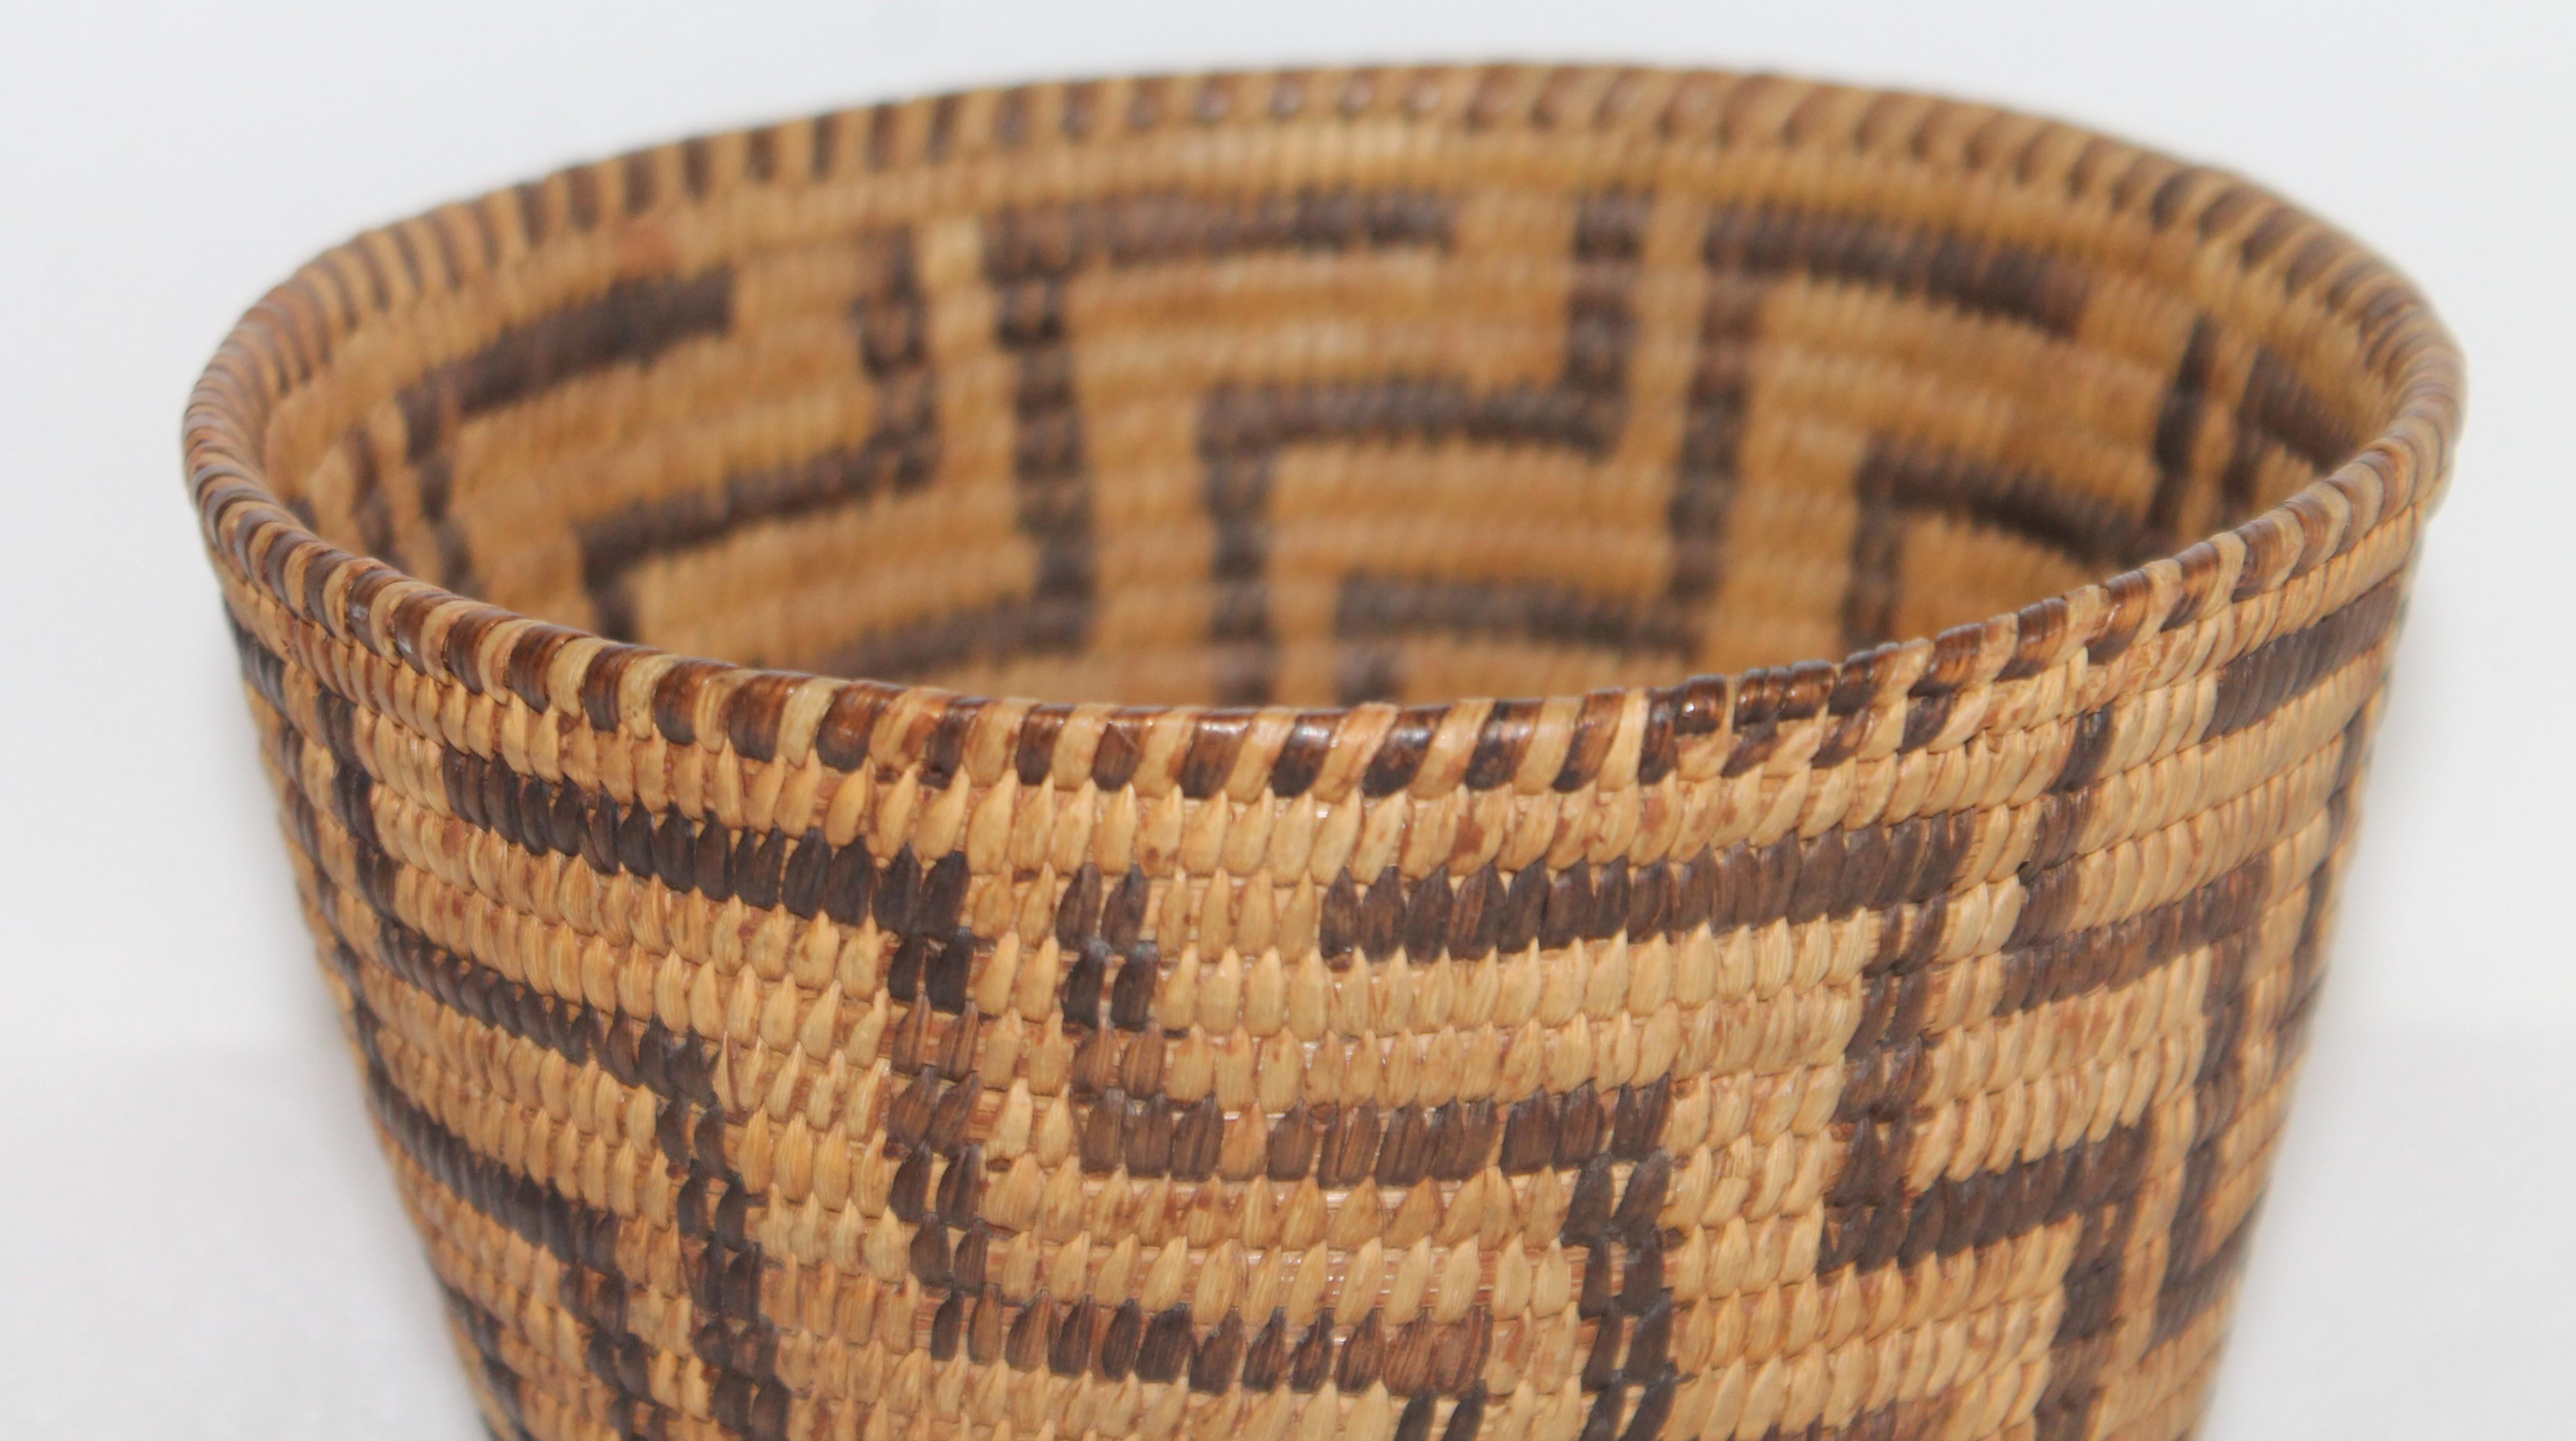 Beautiful American Indian Pima basket with great form and design. Very tightly woven and in stellar condition.